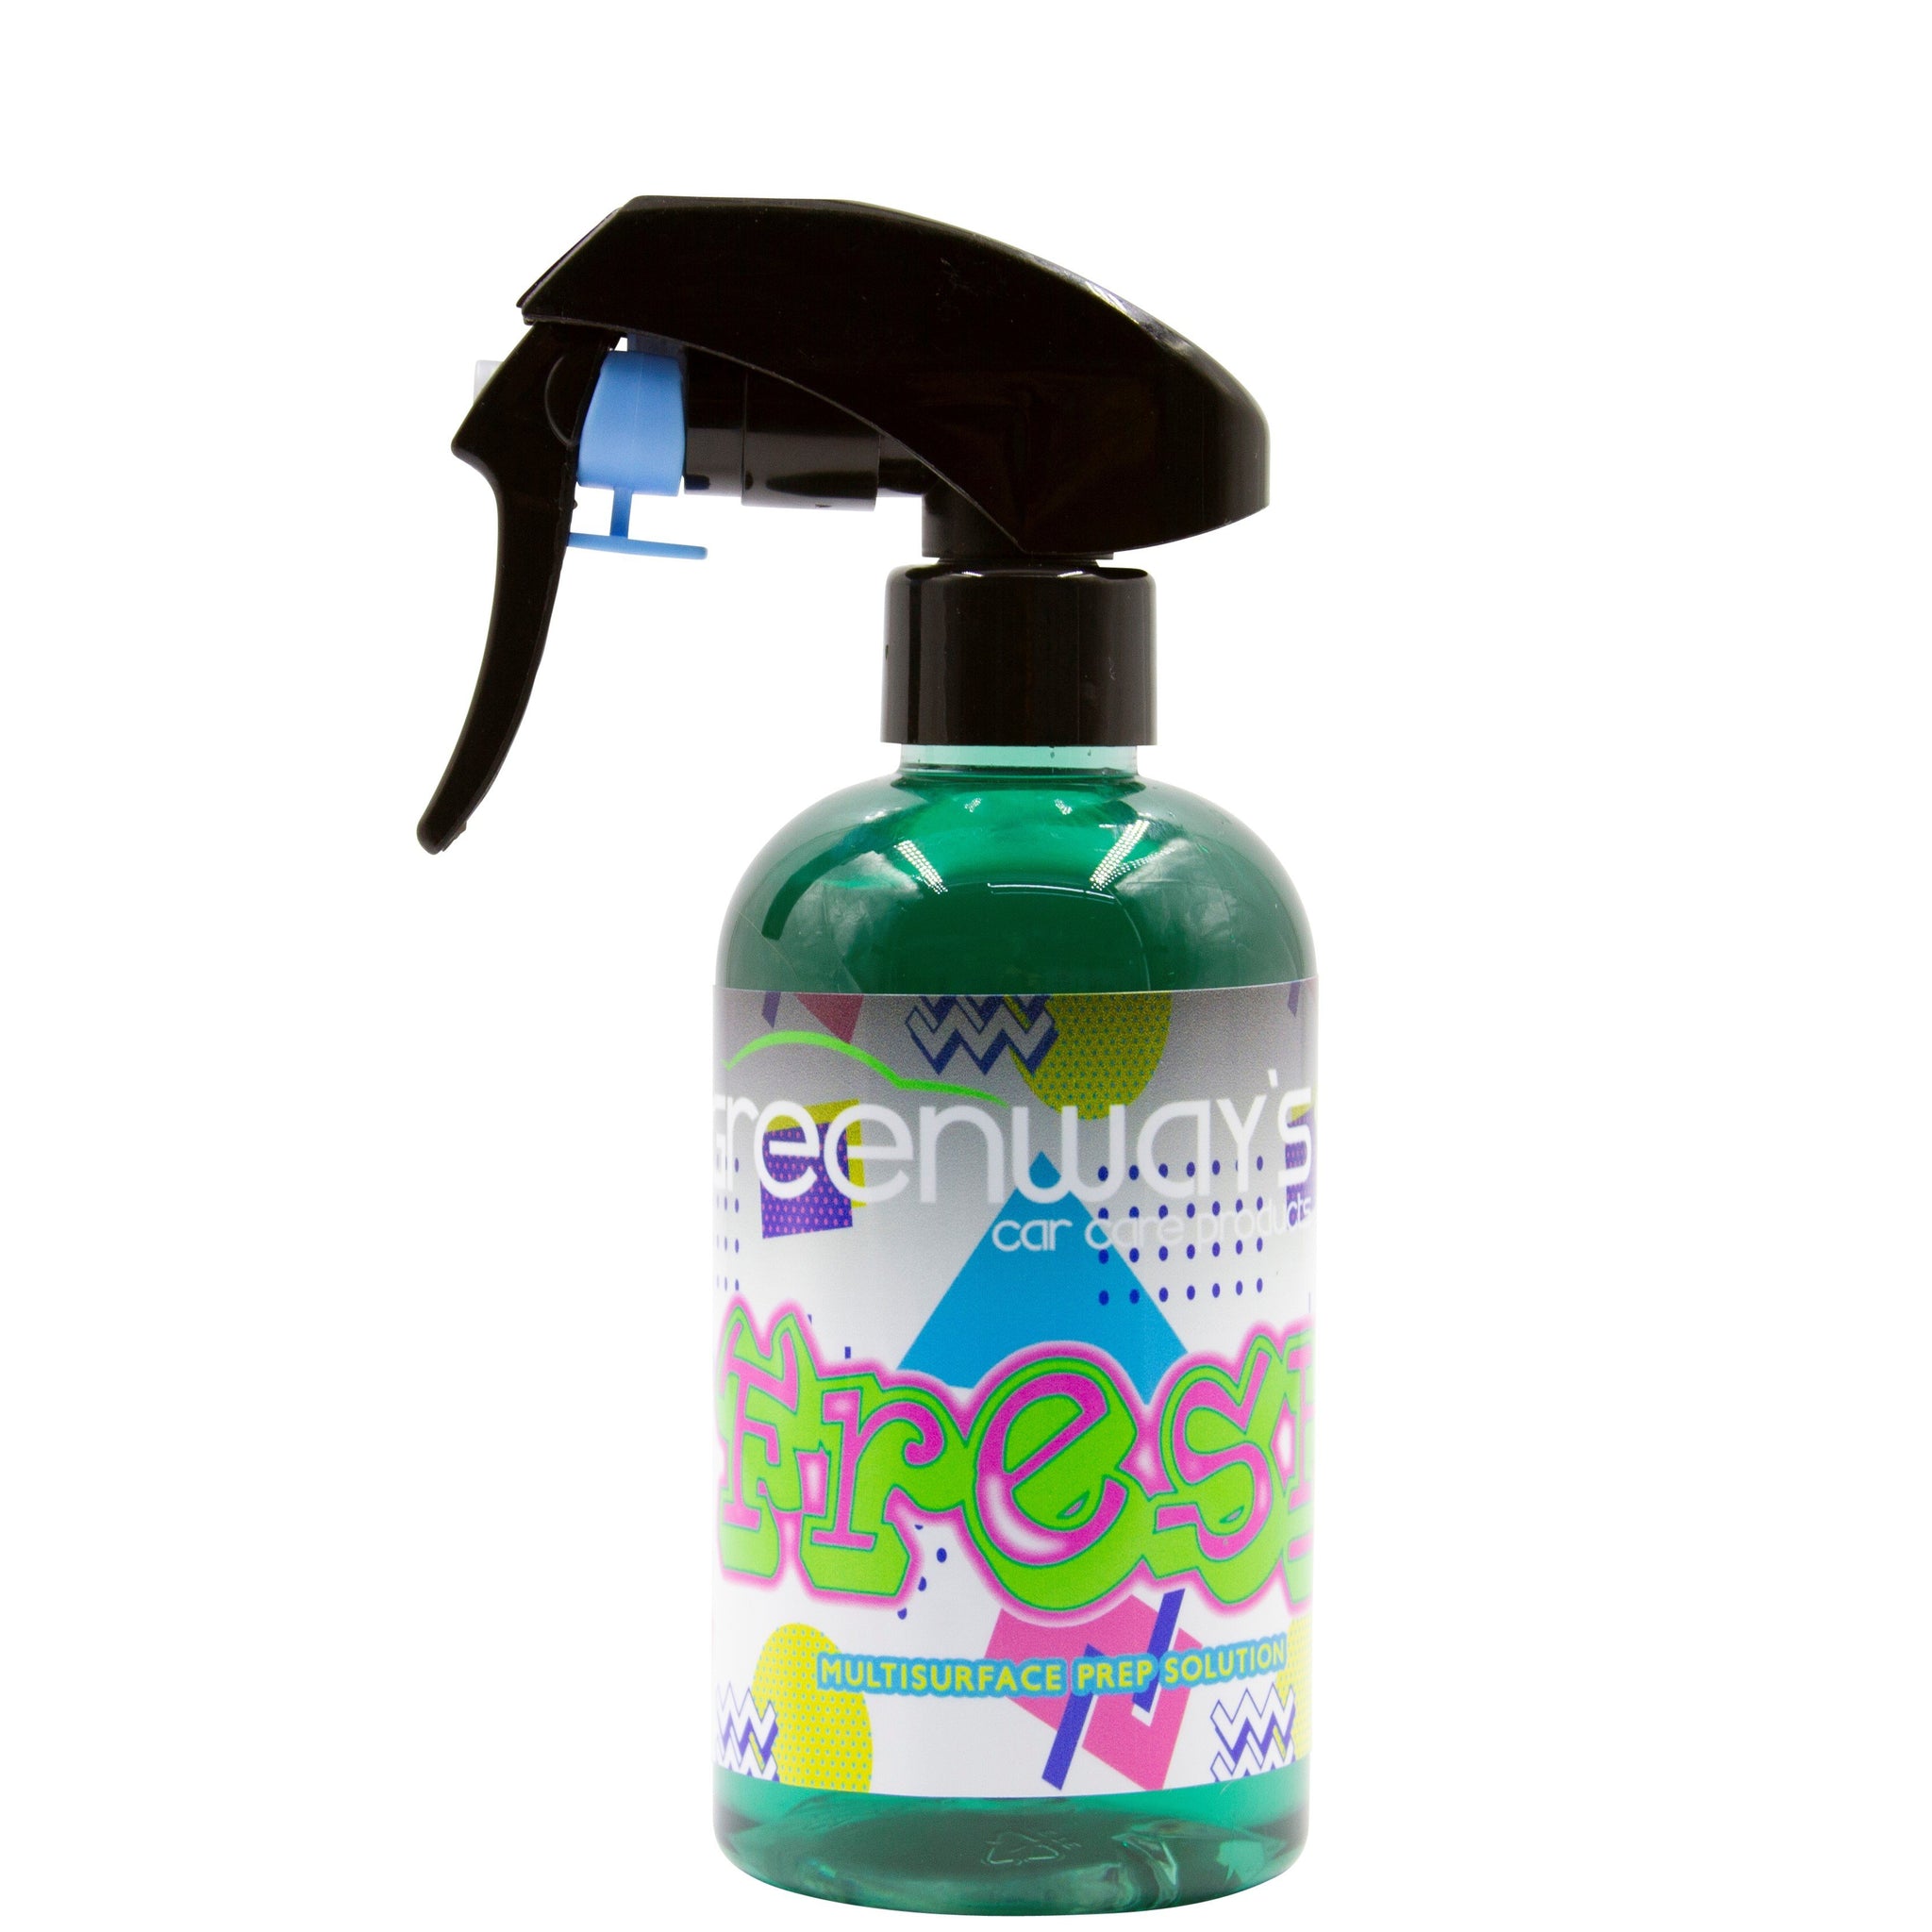 Greenway’s Fresh, car paint preparation, multi-surface cleaning solution, buffing pad cleaner, custom scented, 8 ounces.